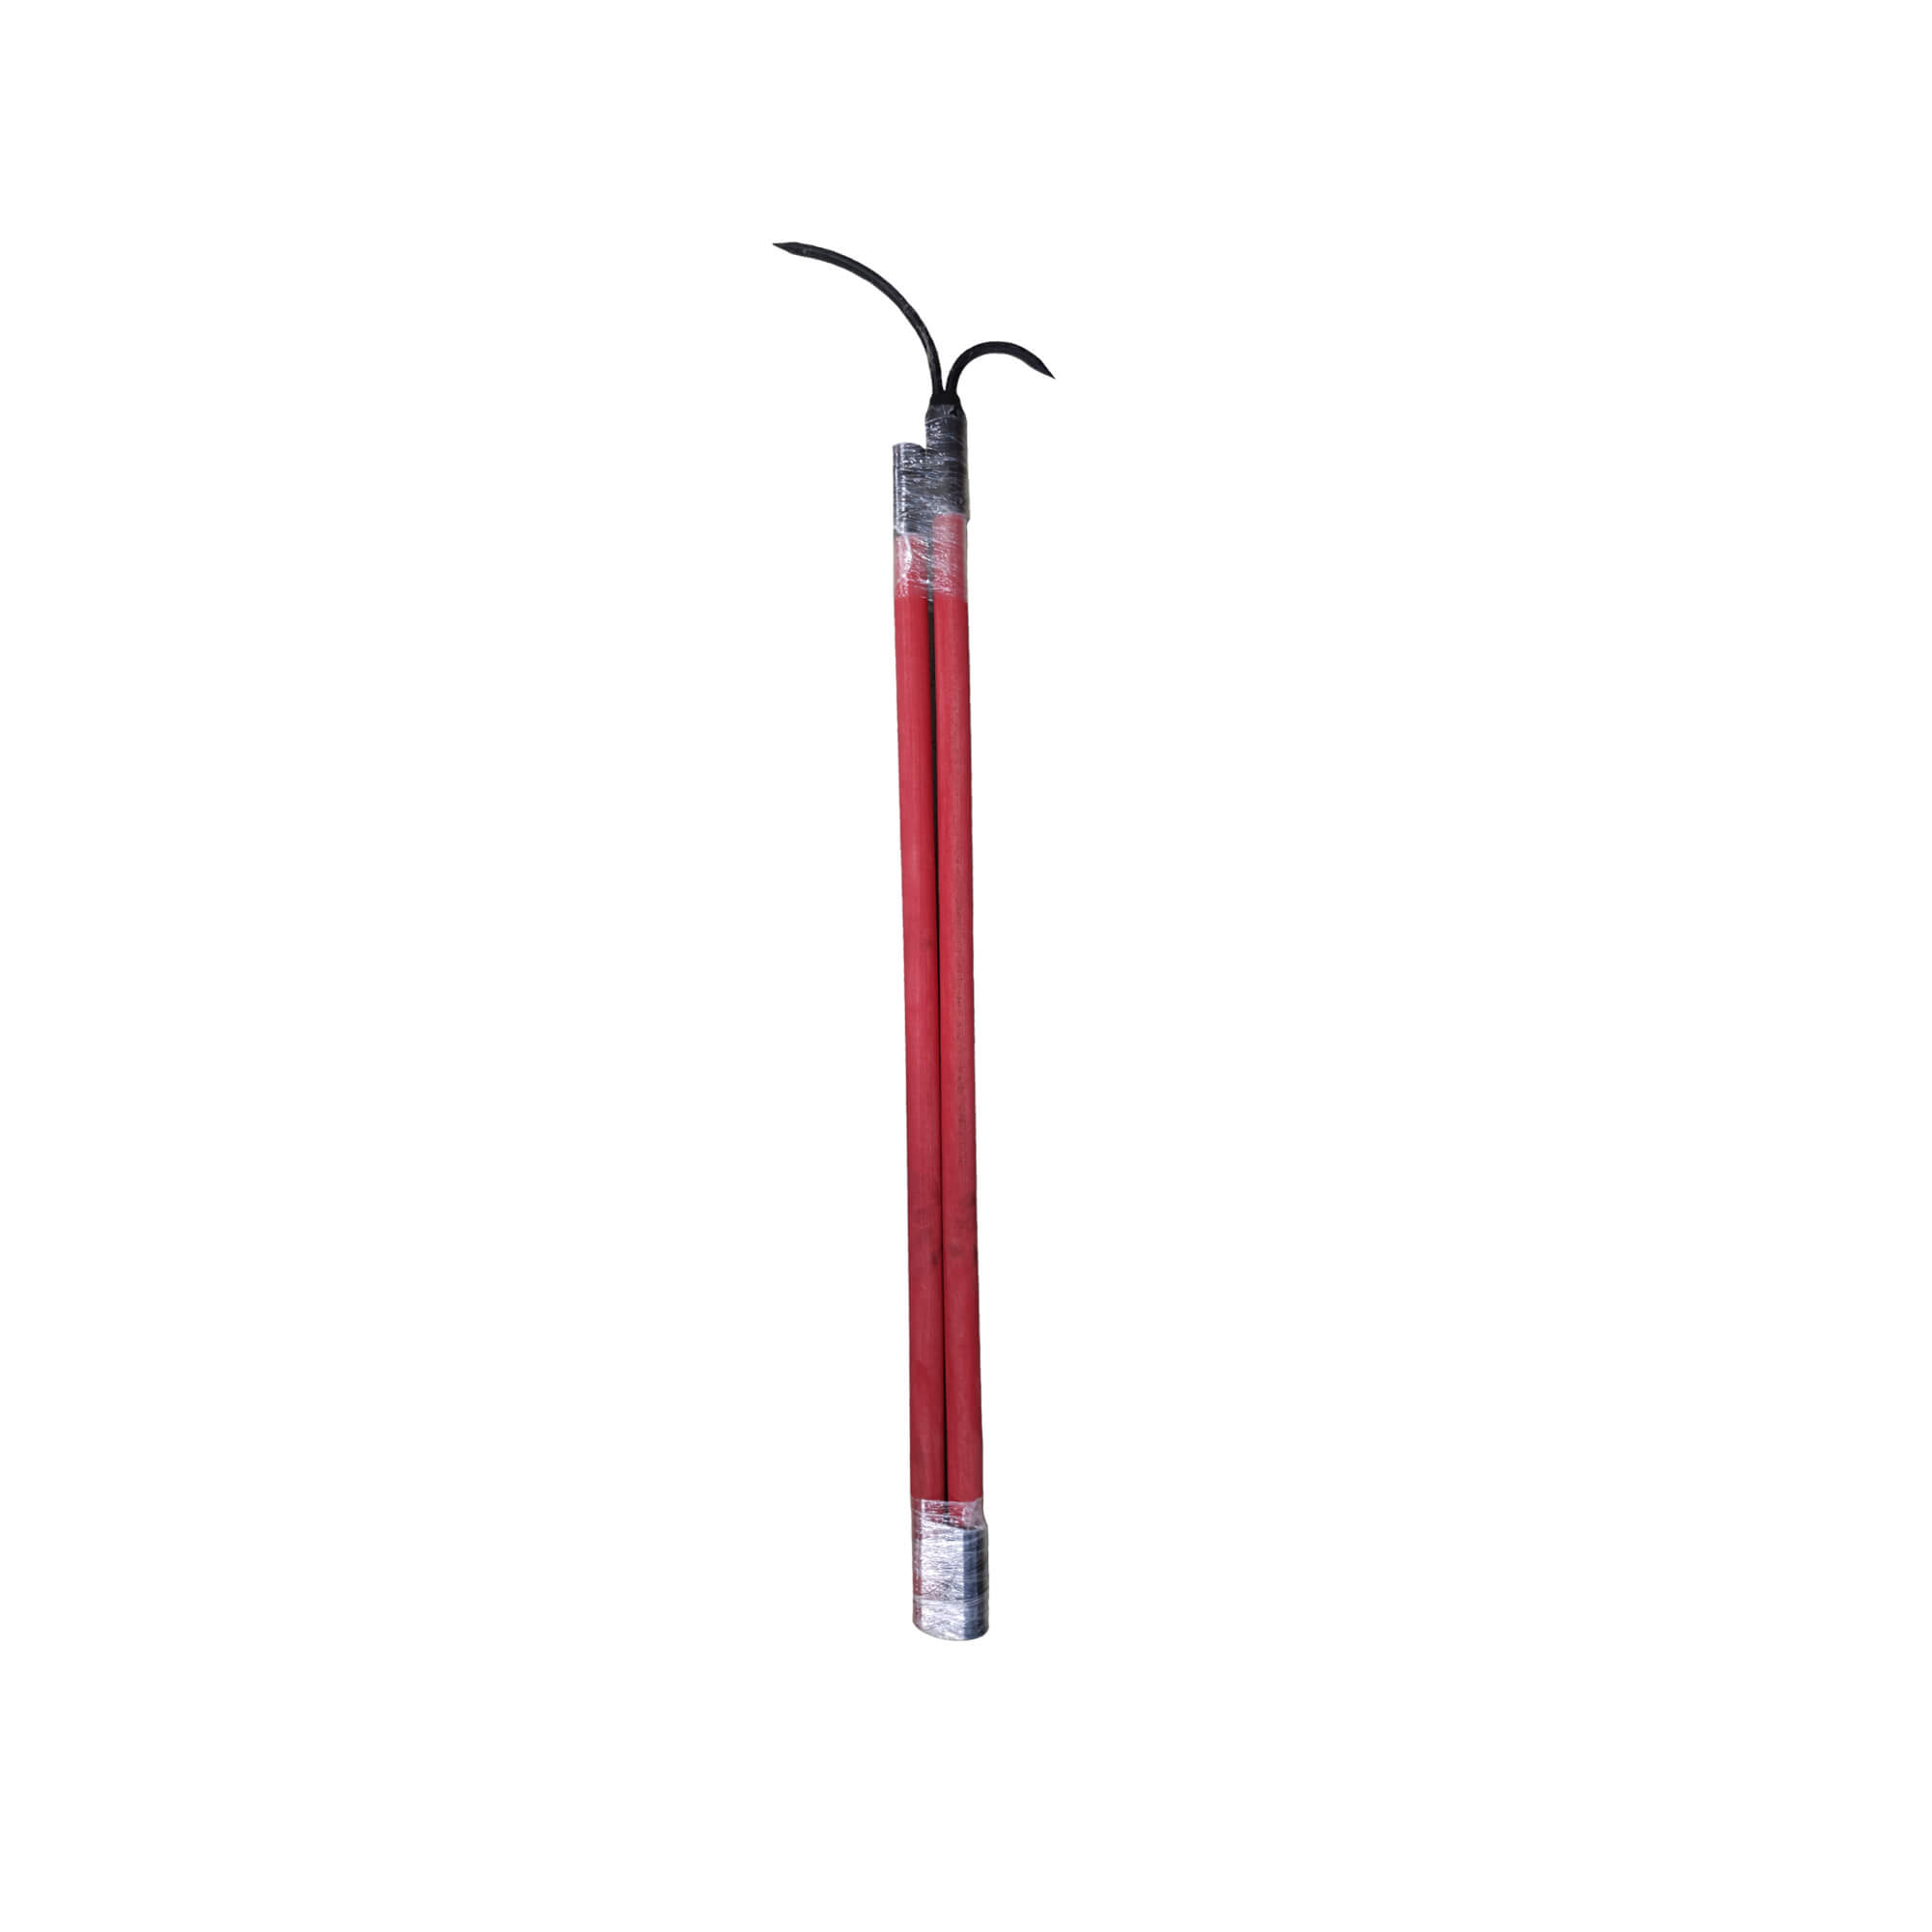 Fire grapple with handle